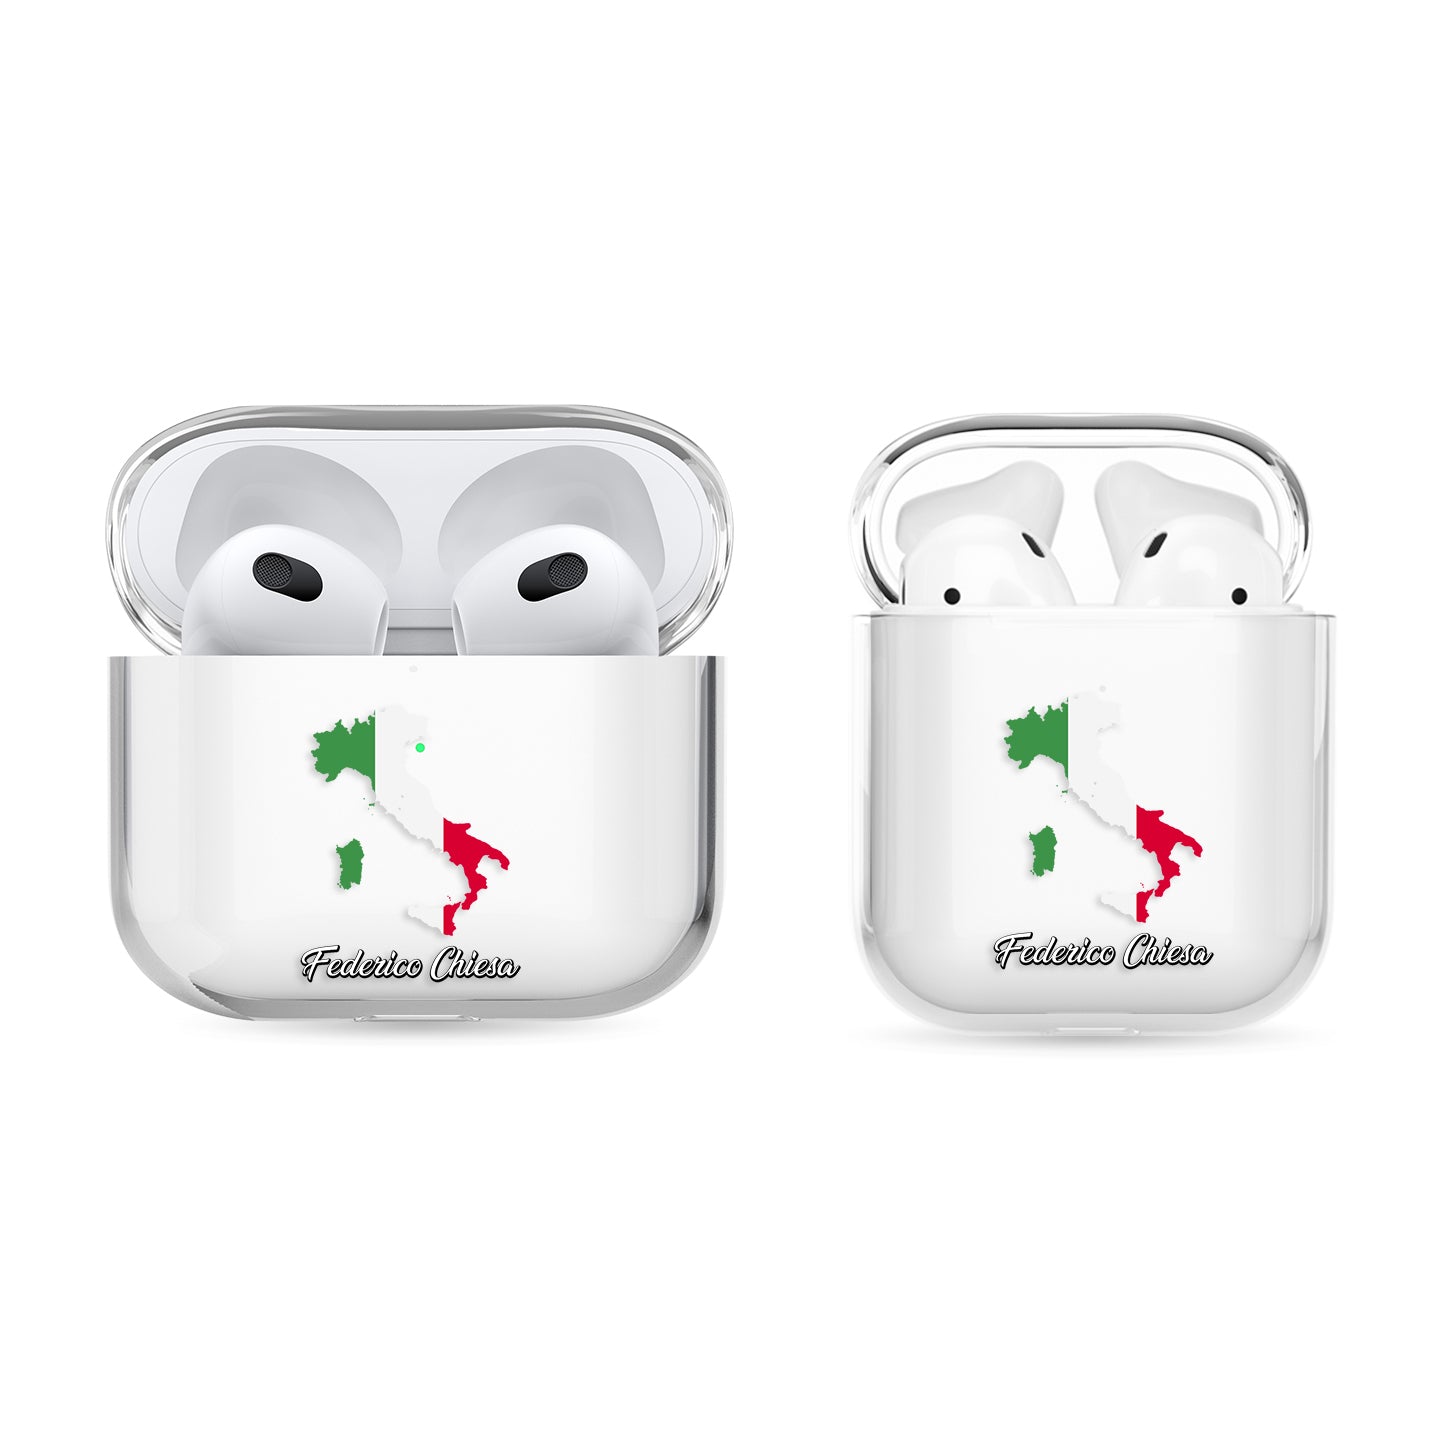 Airpods Hülle - Italien Flagge